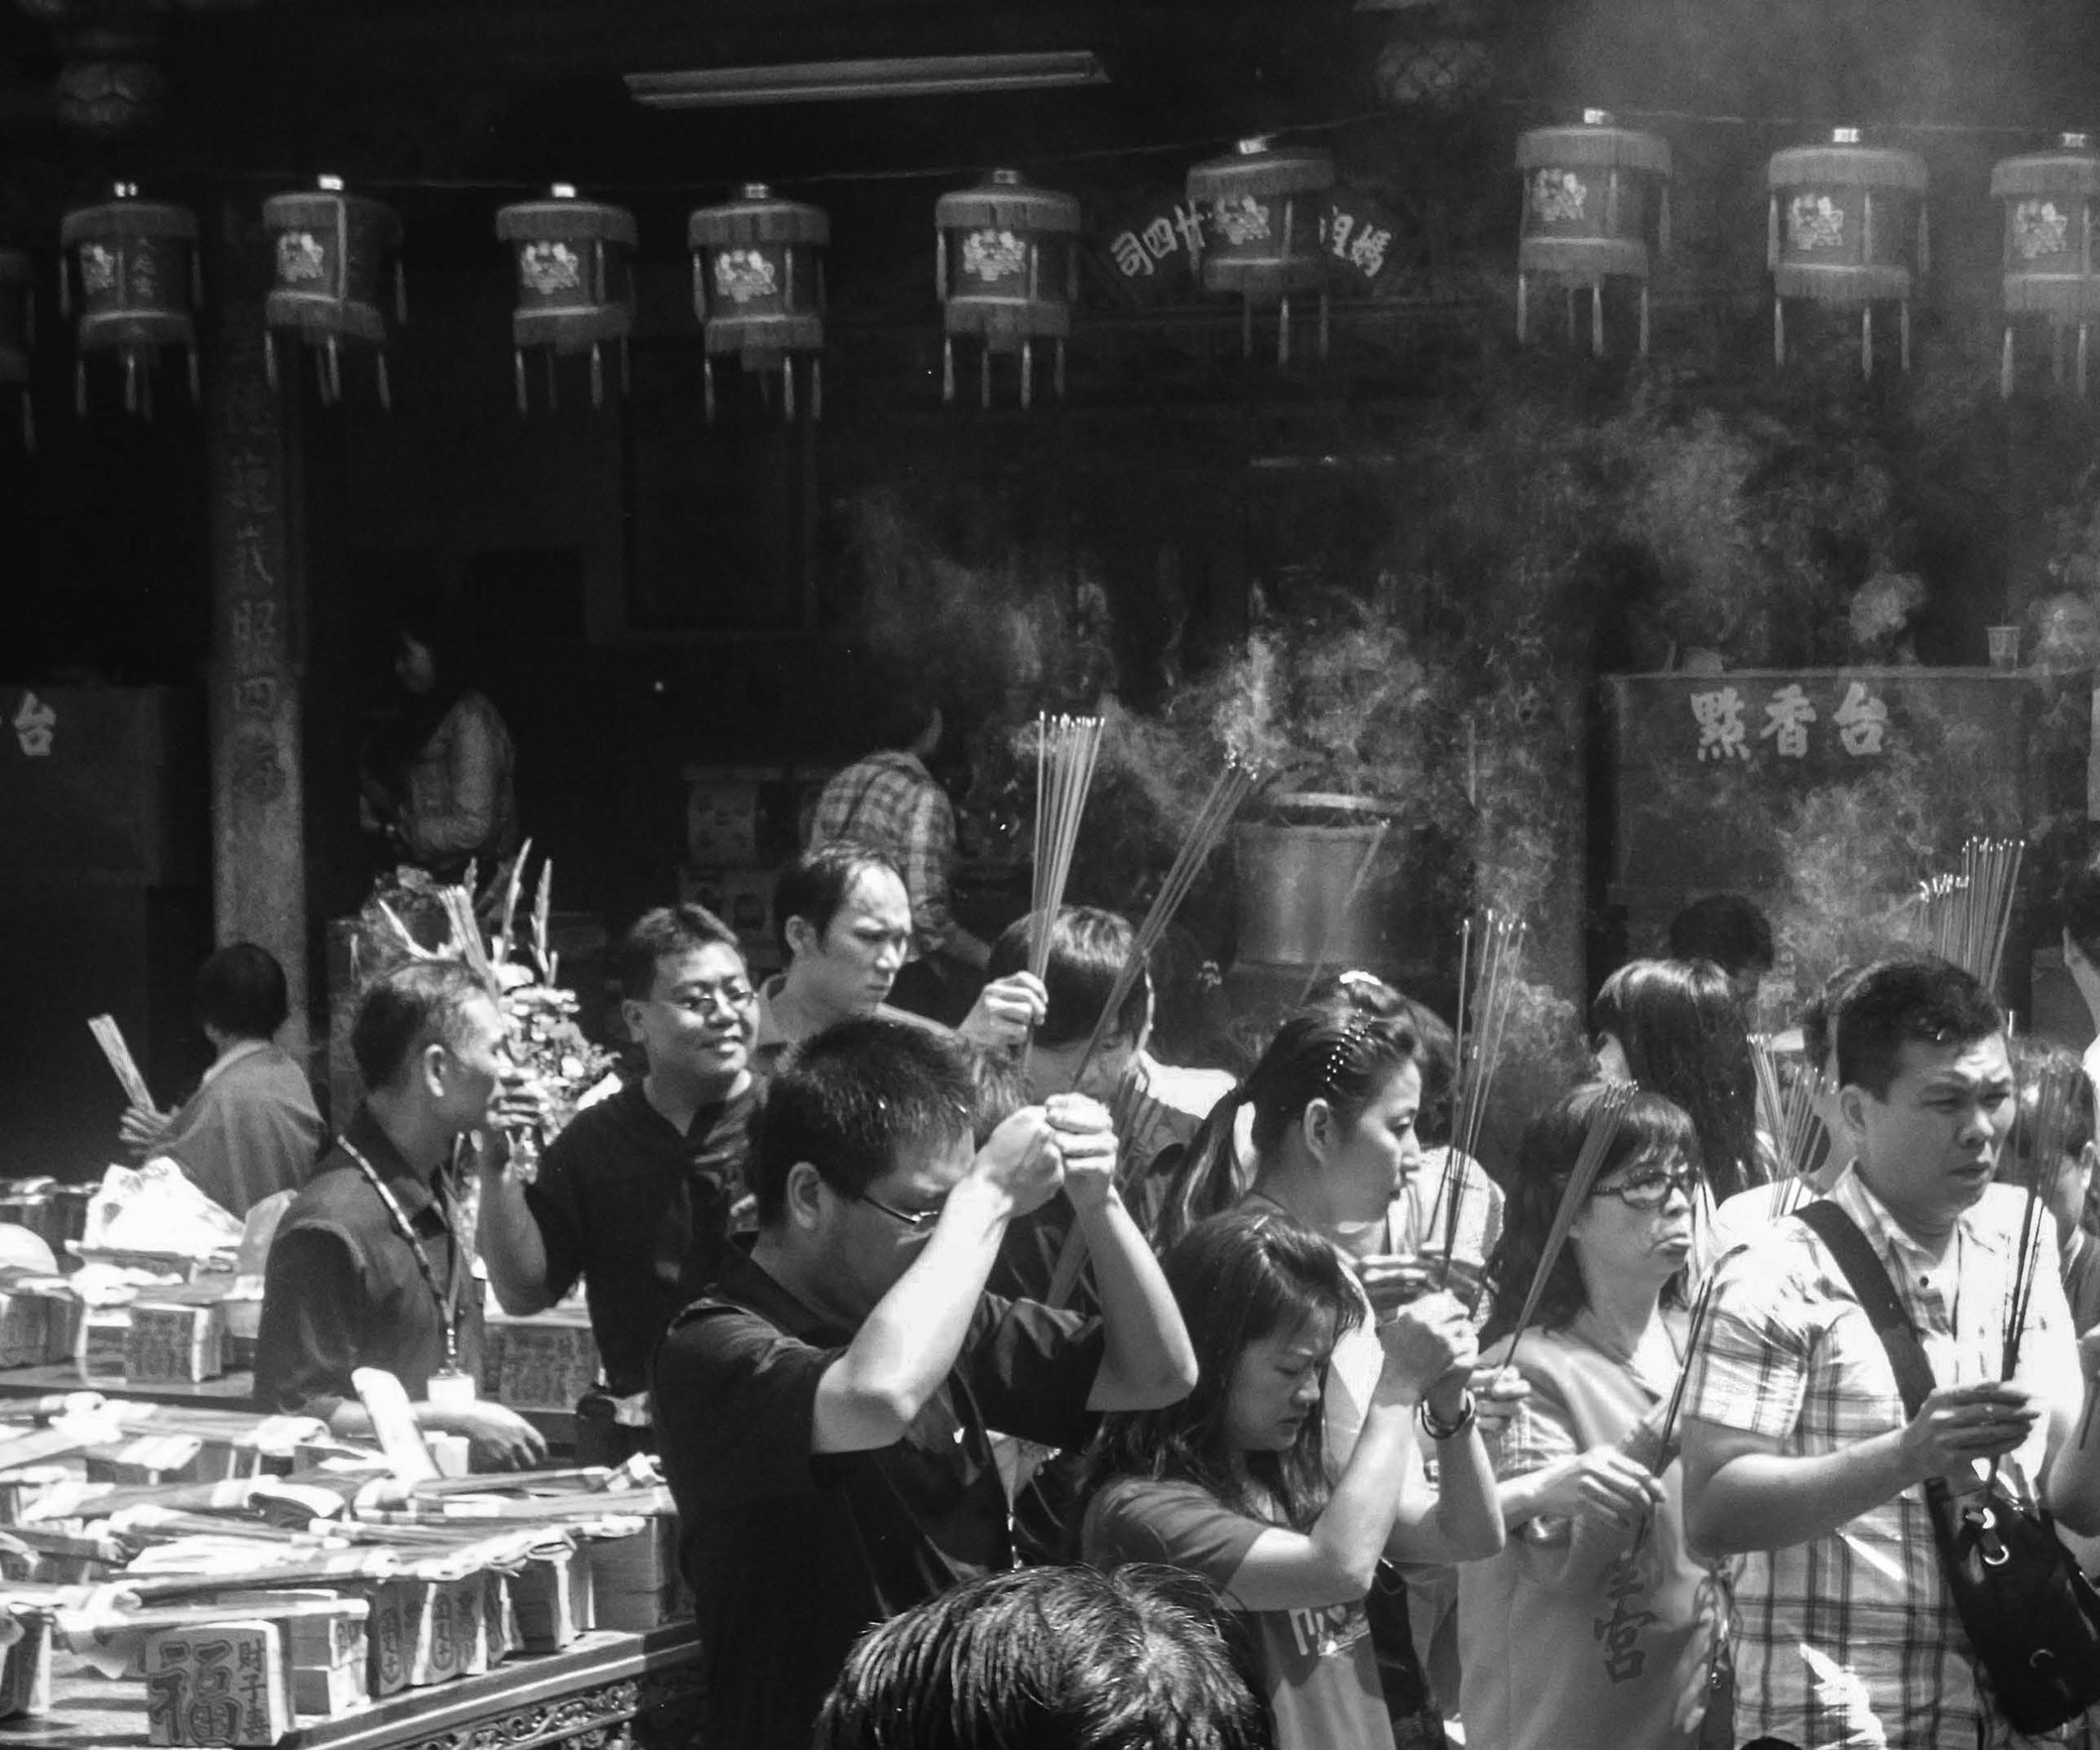 Worshippers amidst clouds of incense conduct a taoist bowing ritual. 